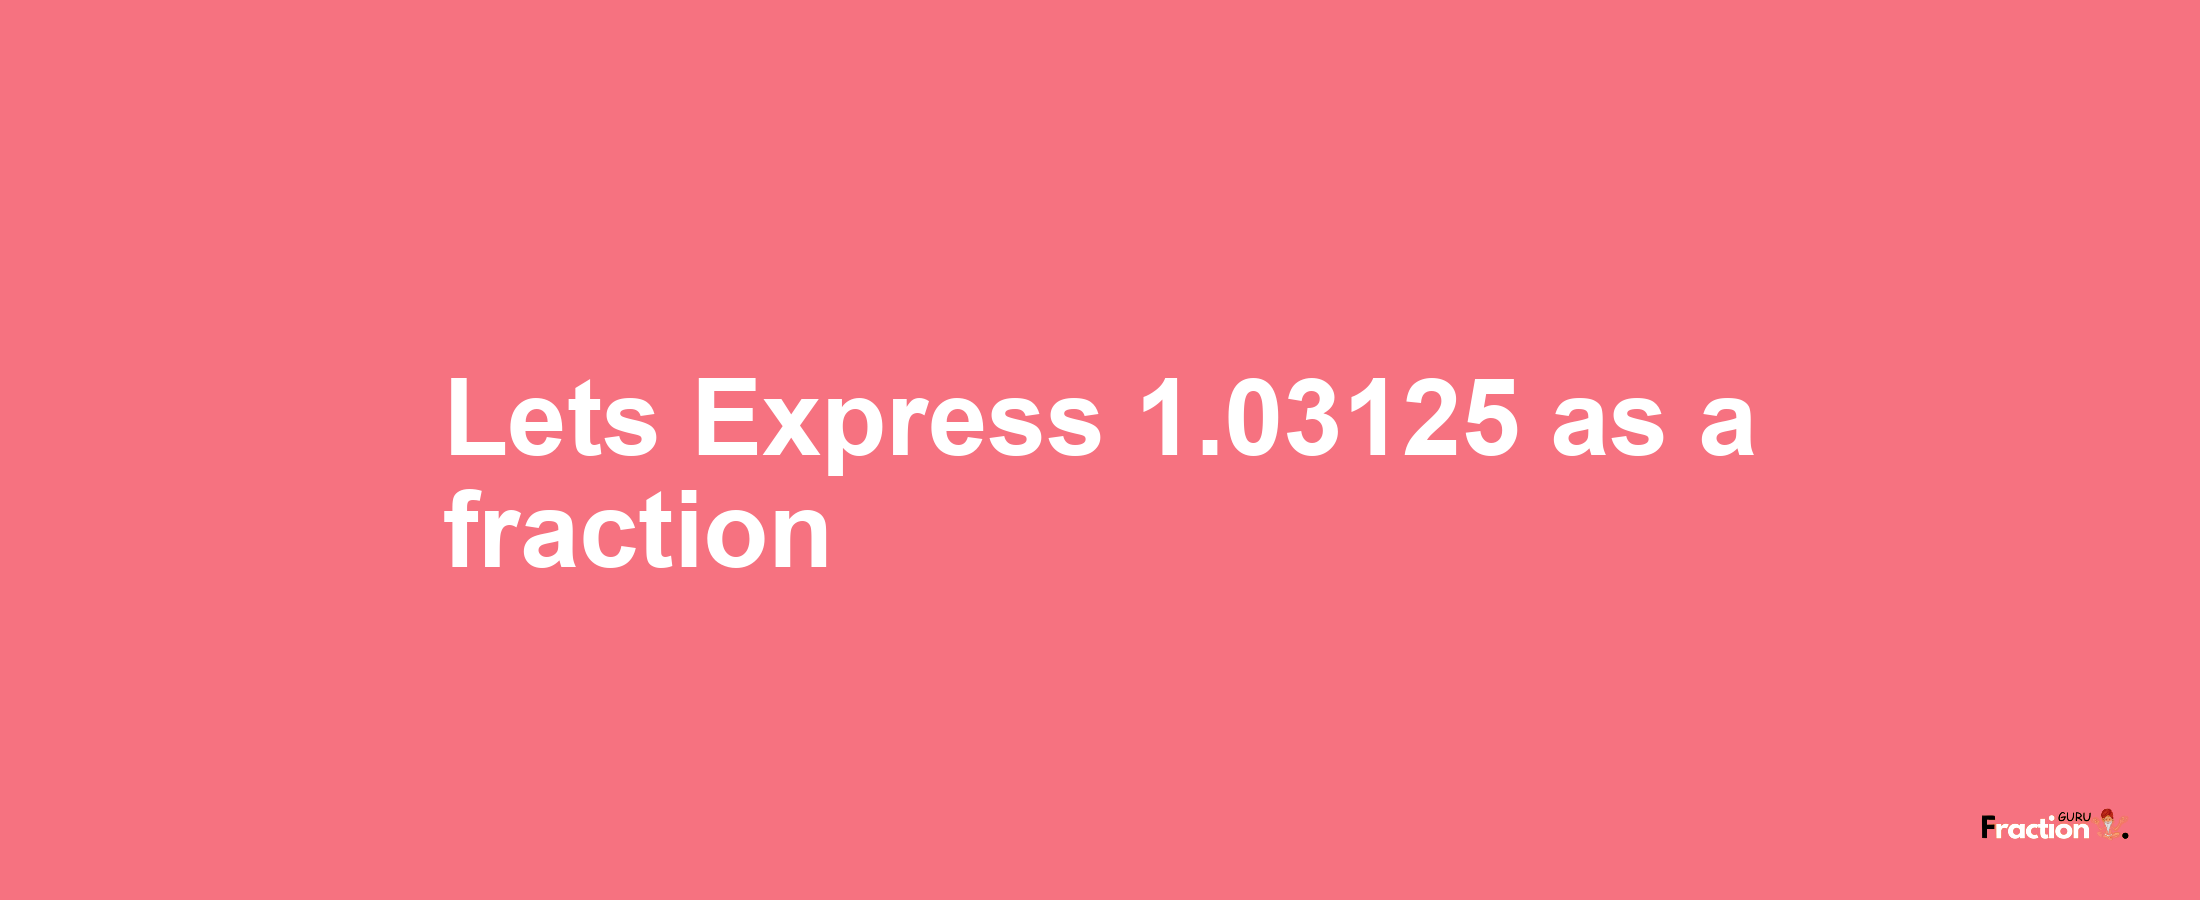 Lets Express 1.03125 as afraction